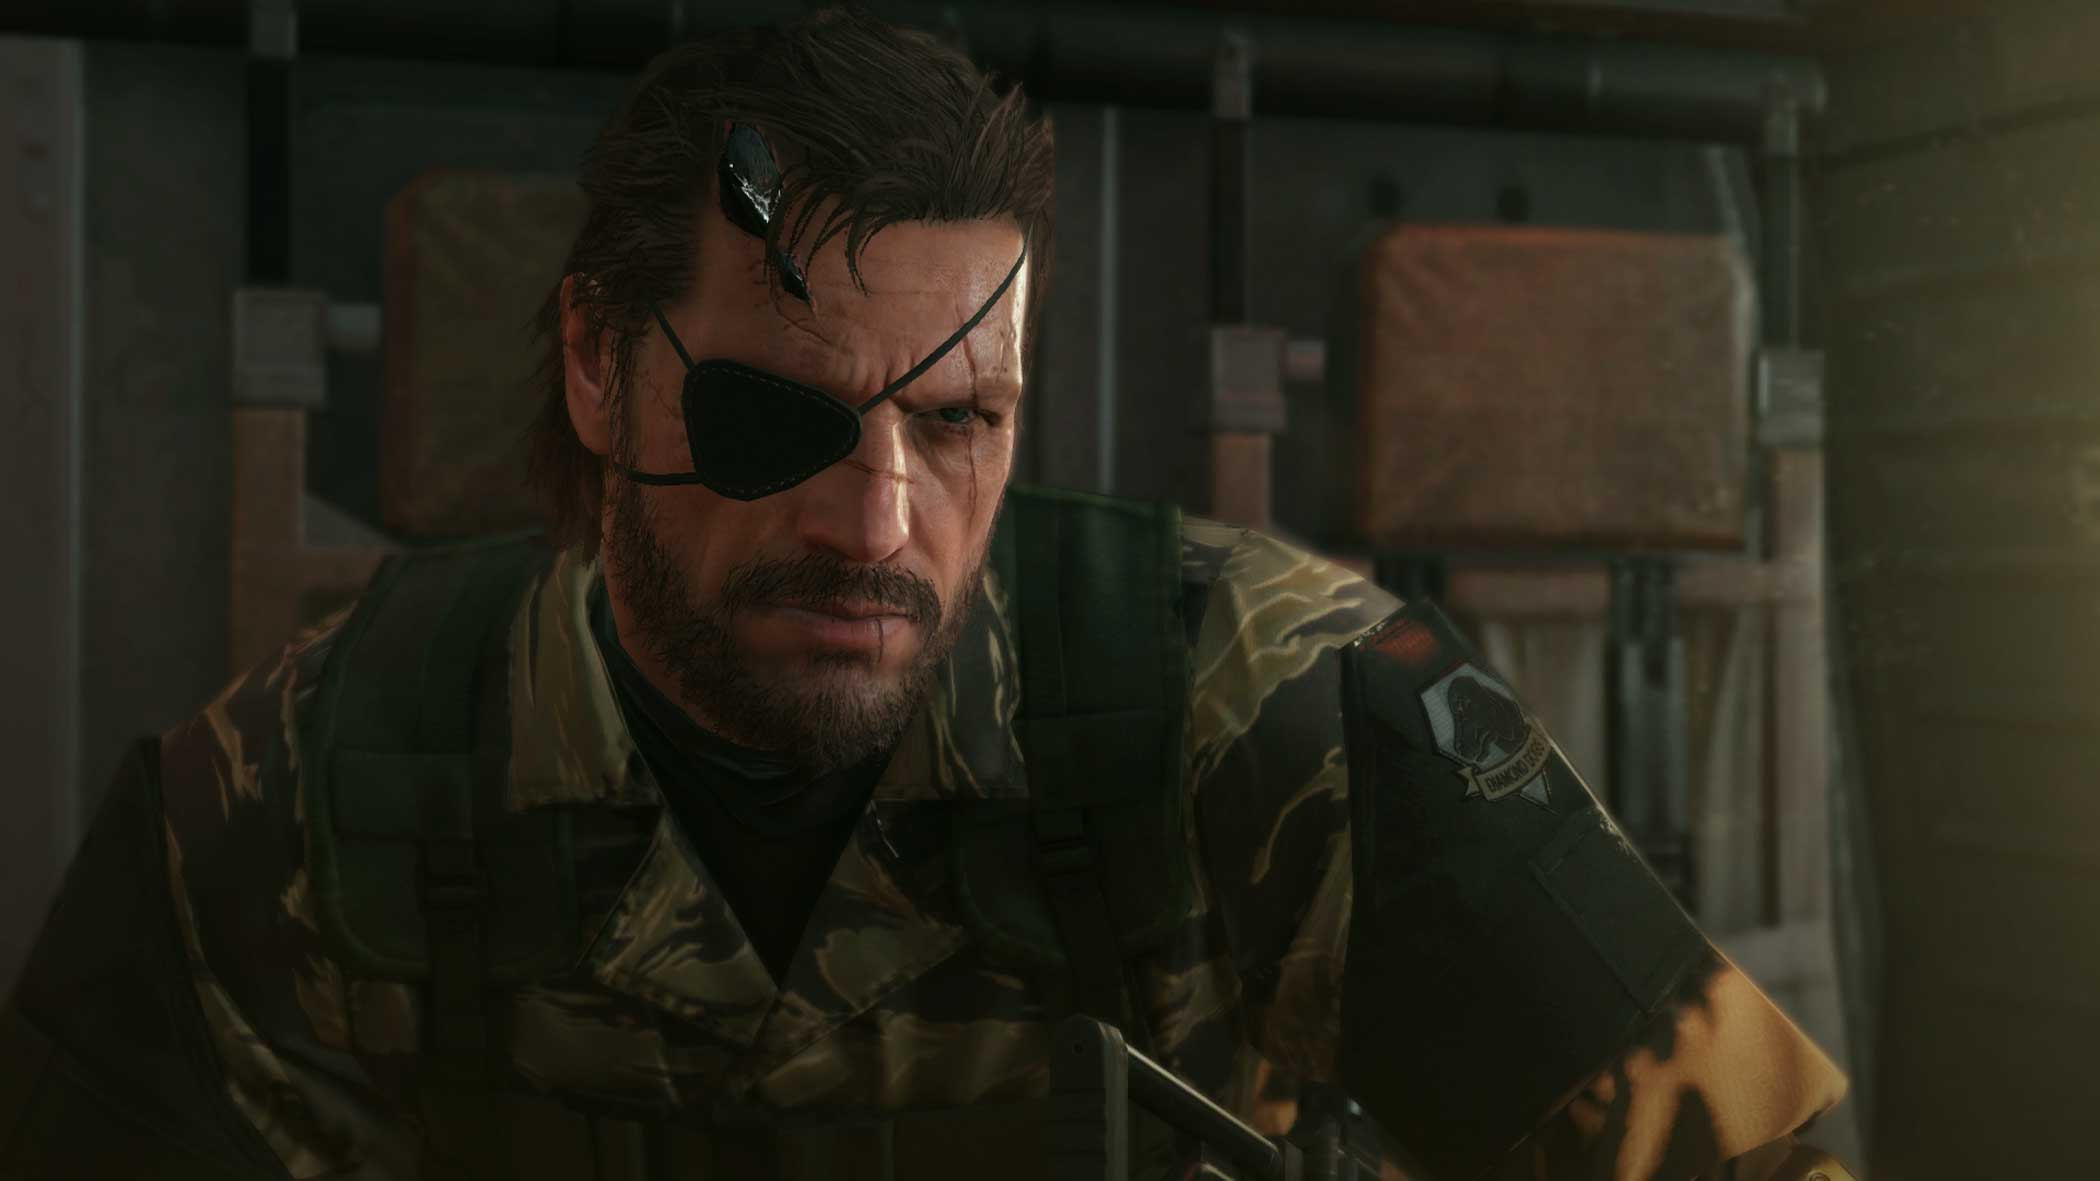 <b>Metal Gear Solid V: The Phantom Pain</b> Design Process: <i>"This cut scene is expressed as a technique called SSS (Sub-Surface Scattering). The soft shadow is scattered on his skin from the light to convey a certain mood."</i> - Kojima Productions (Kojima Productions)